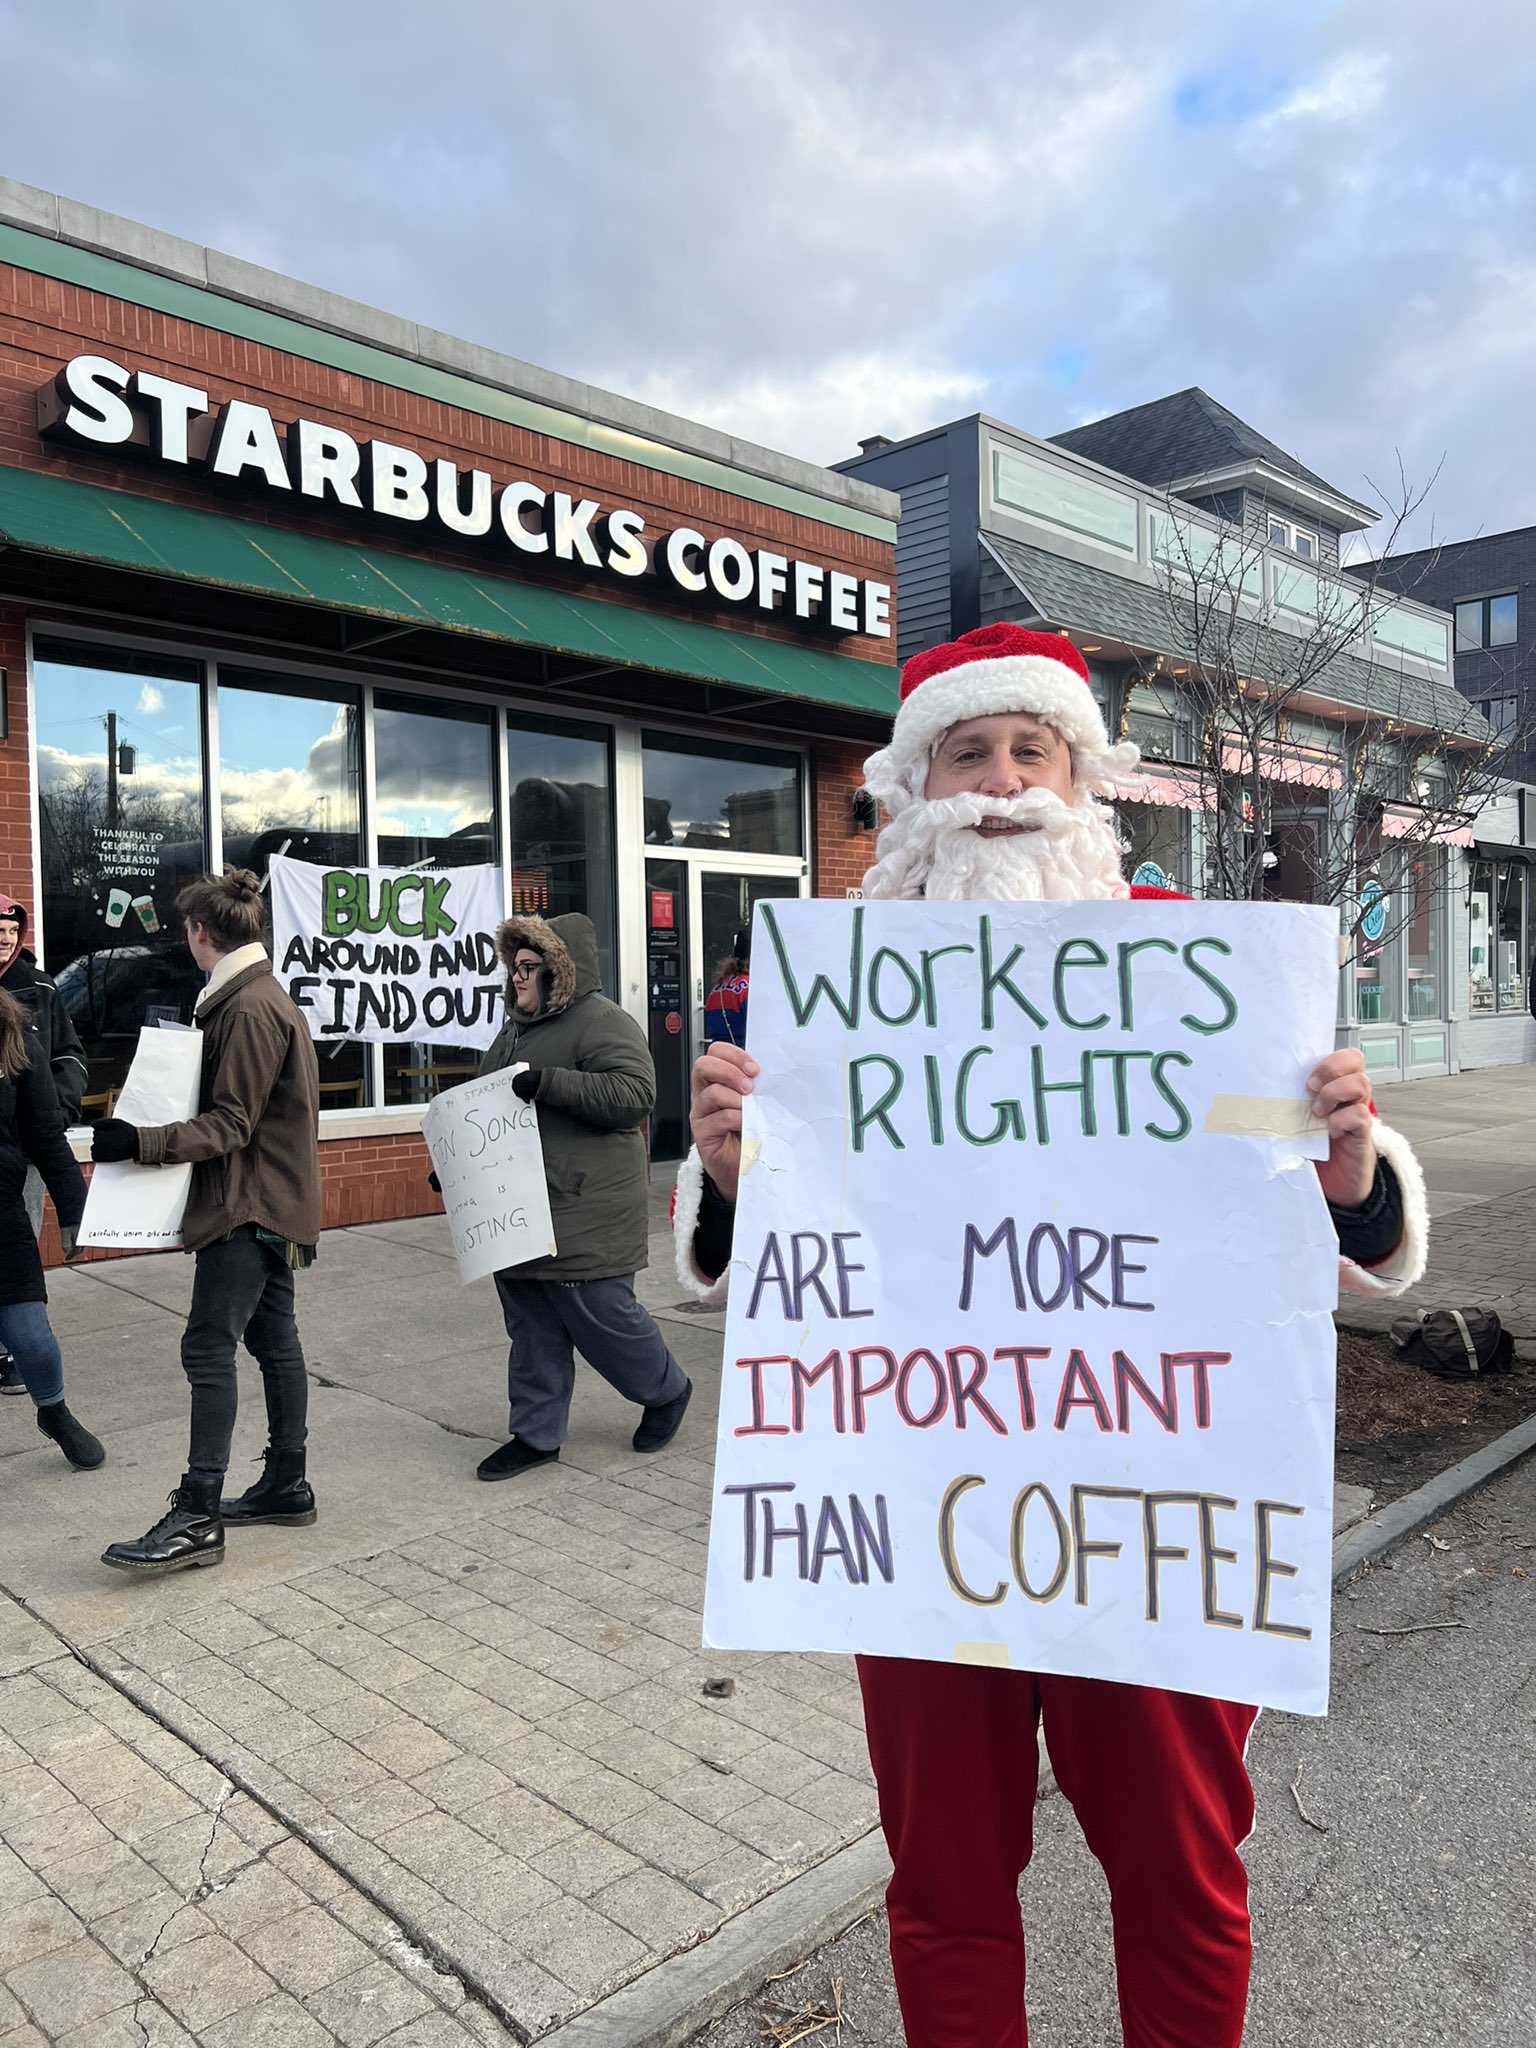 Starbucks Workers United Stickers - Satyr's Sticker Stash's Ko-fi Shop -  Ko-fi ❤️ Where creators get support from fans through donations,  memberships, shop sales and more! The original 'Buy Me a Coffee